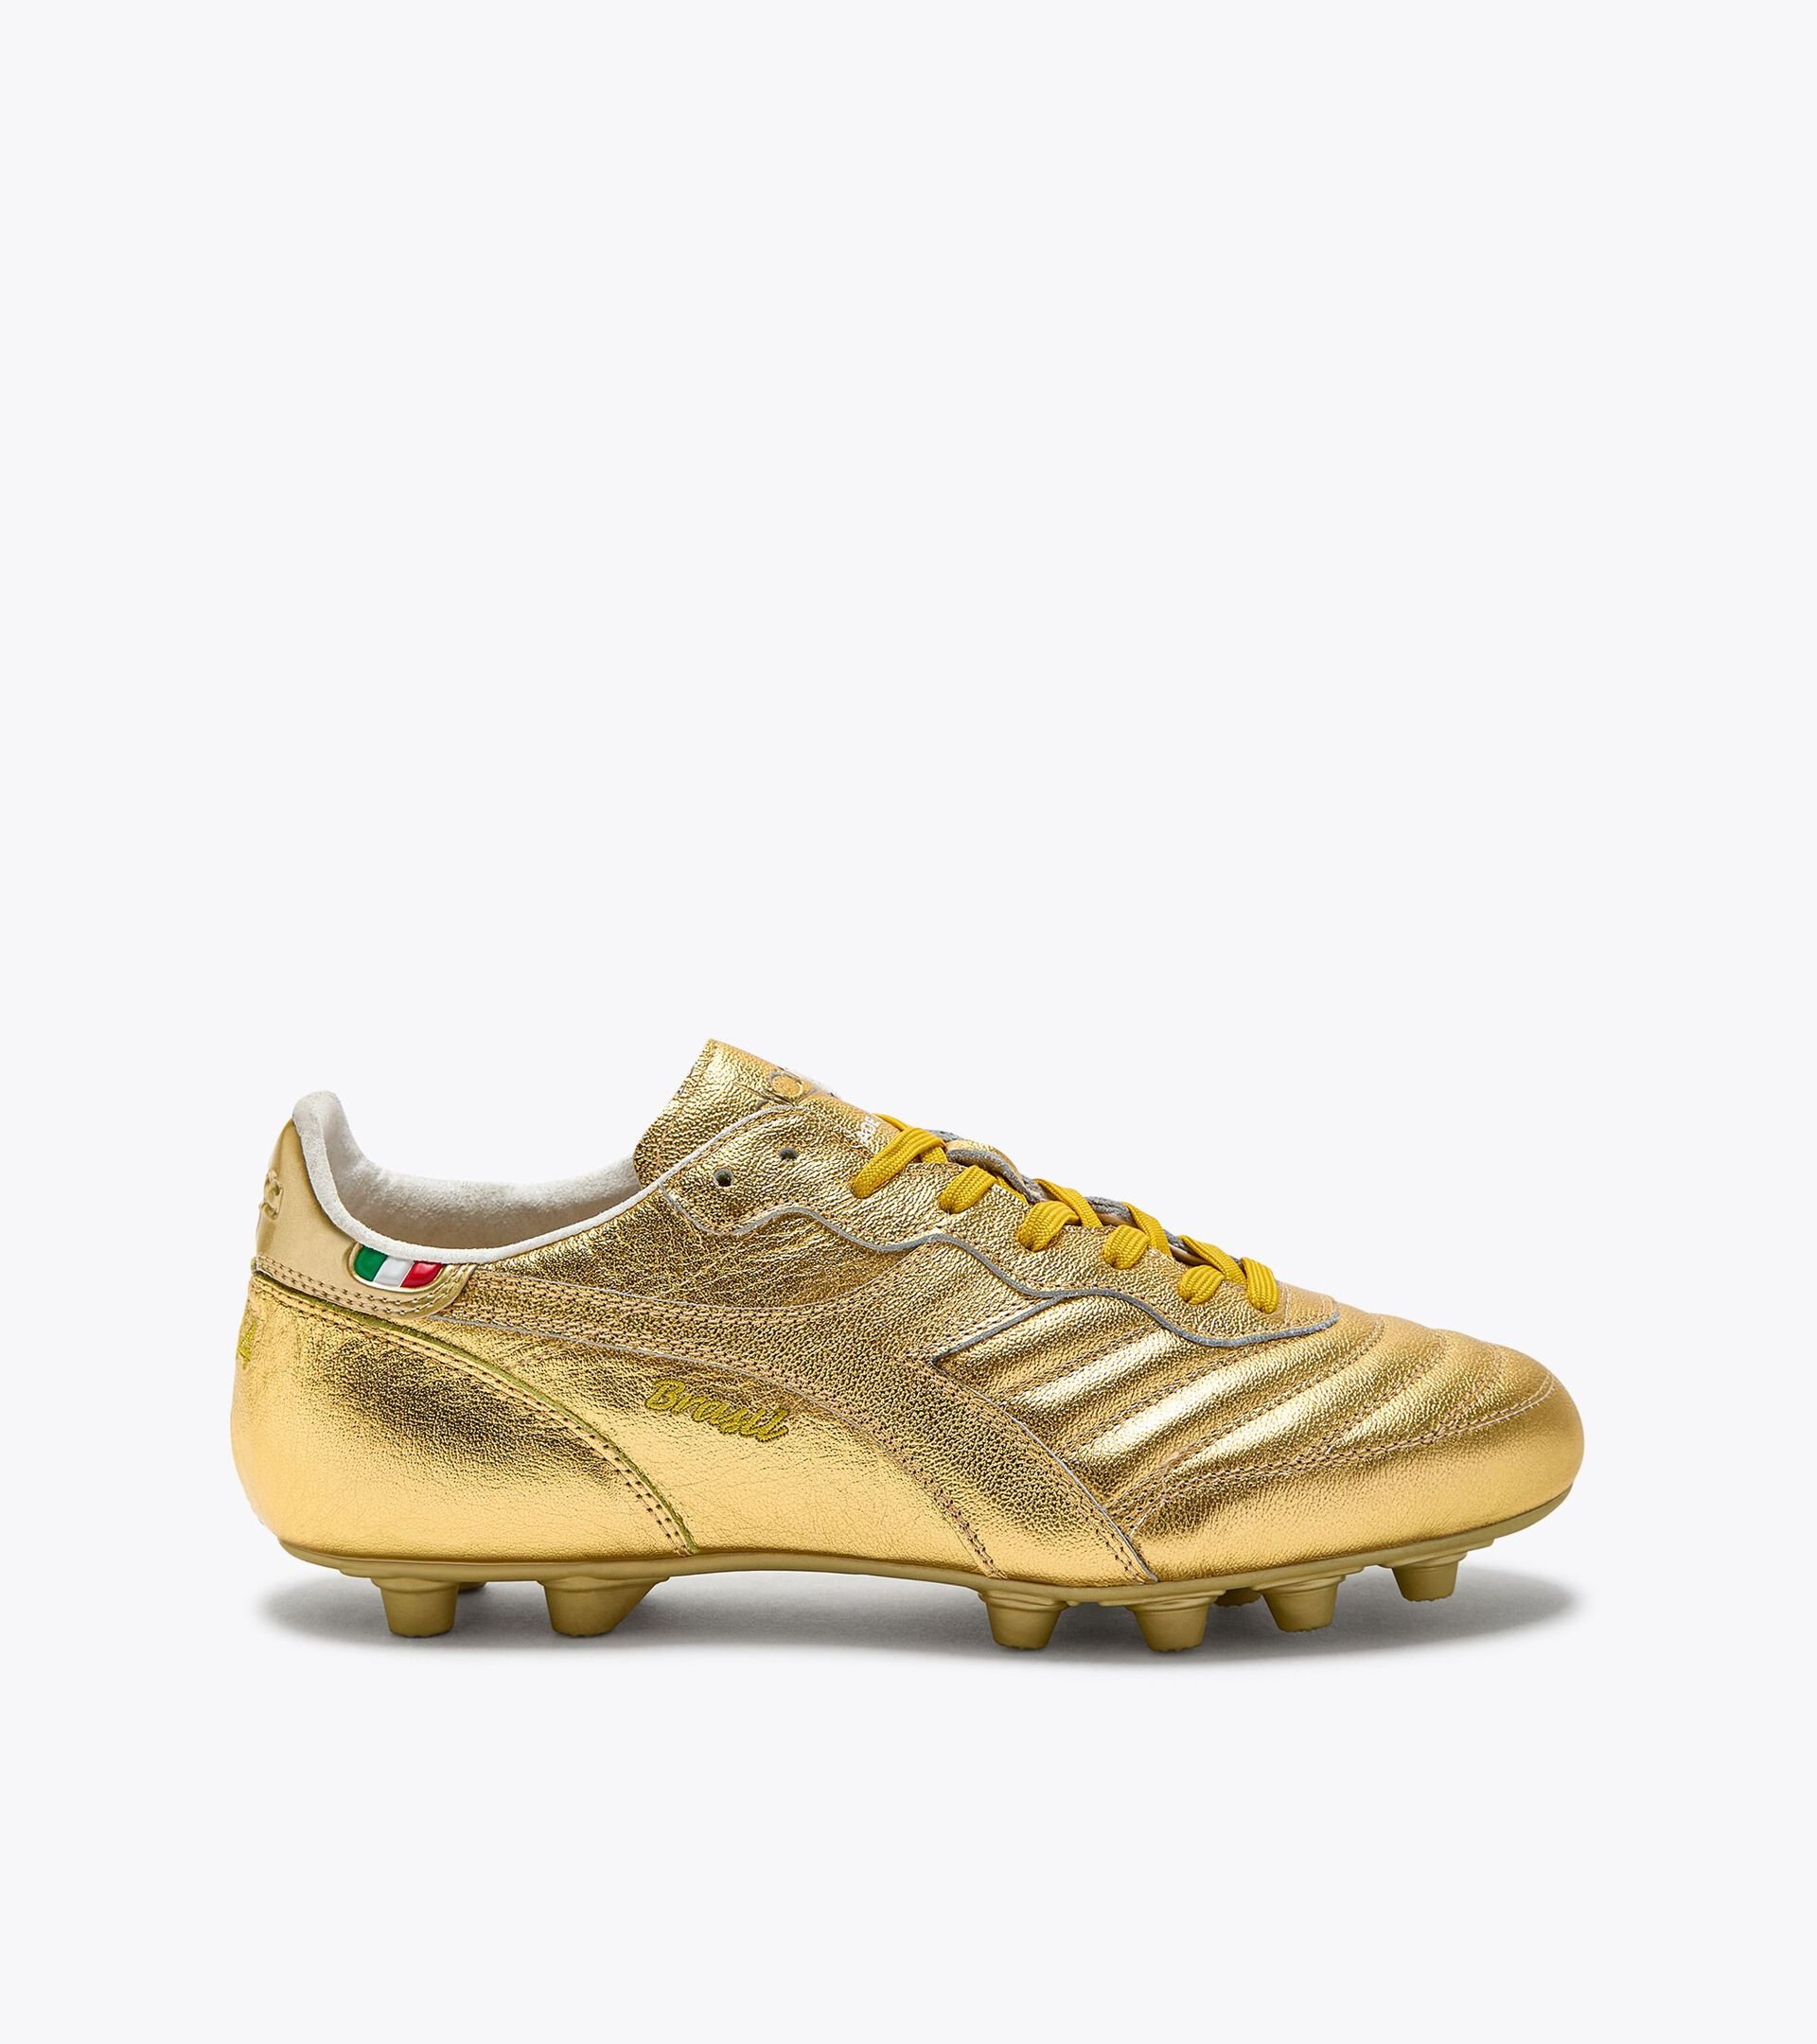 Firm ground football boots - Made in Italy BRASIL ITALY OG LT+  MDPU GOLD BROWN - Diadora